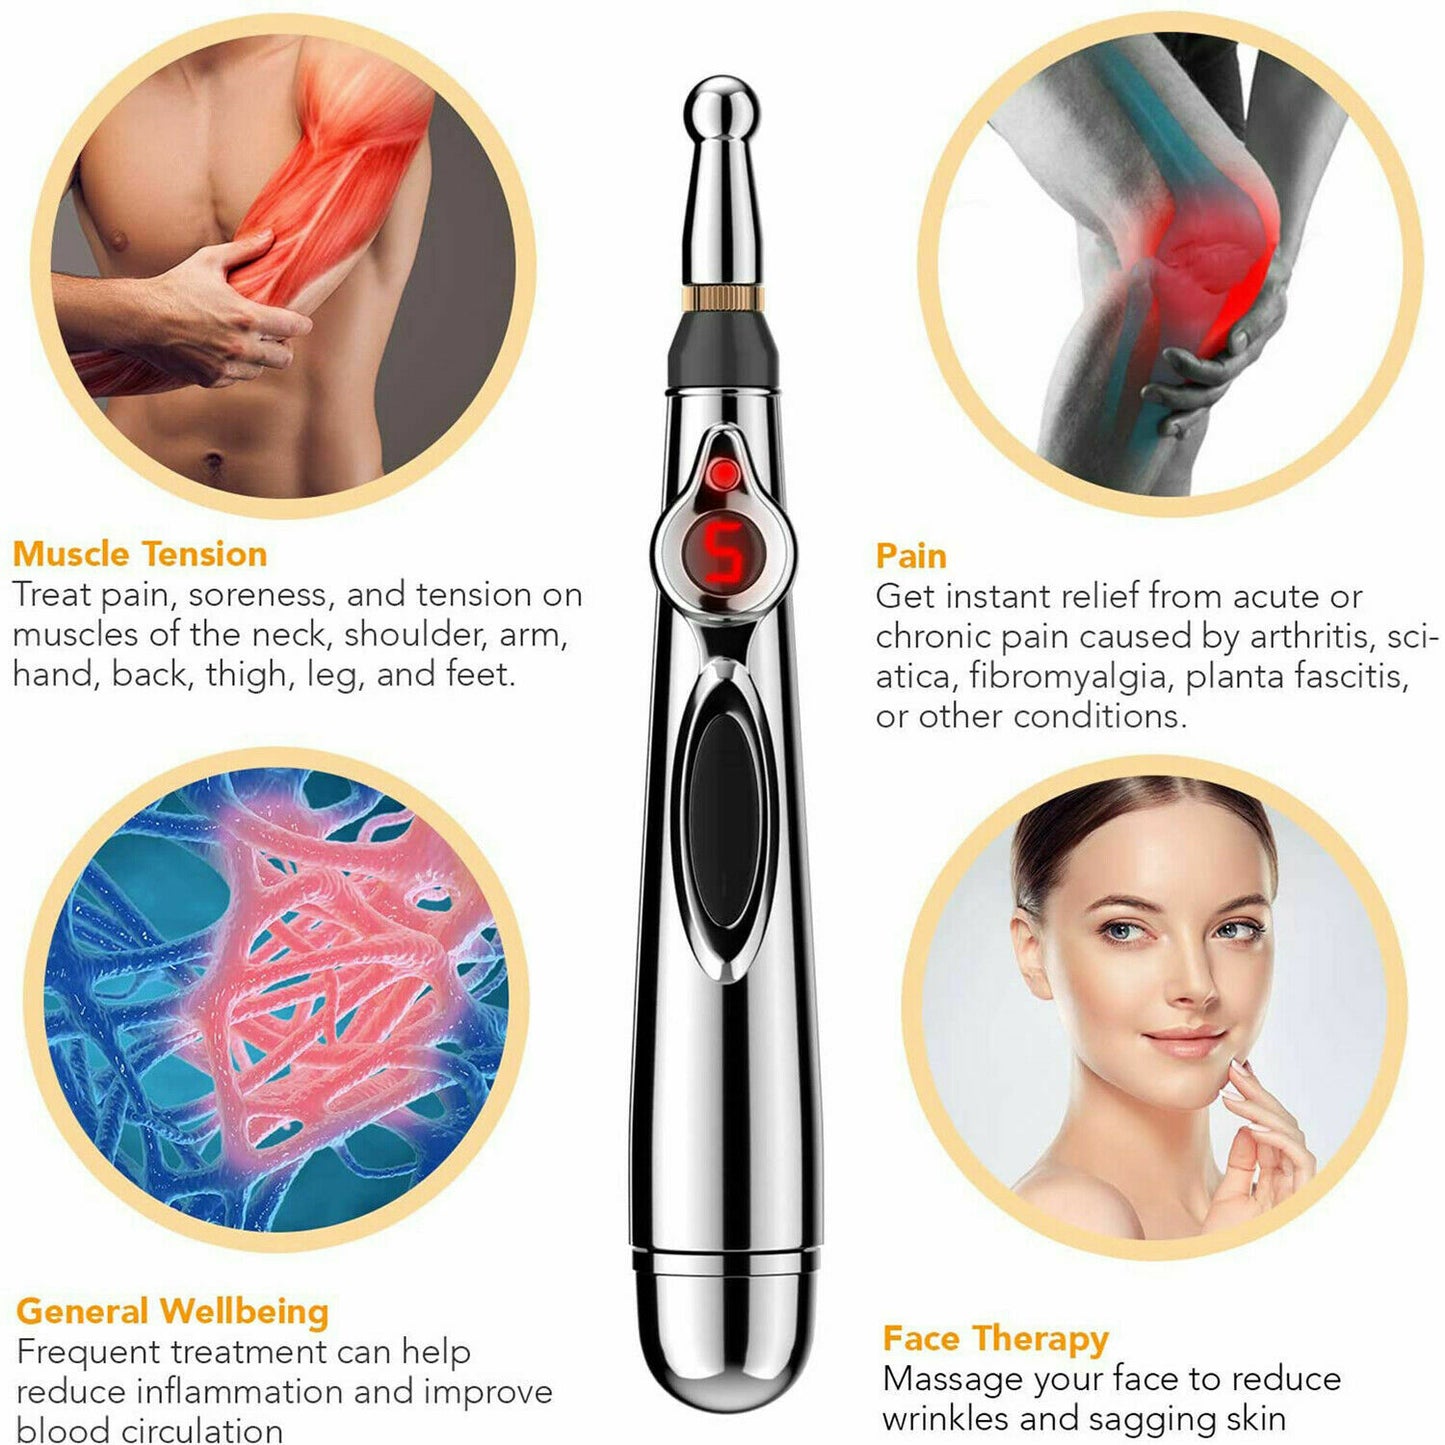 9 Gears Electronic Acupuncture Pen Pain Relif Therapy Massage Pen Meridian Health Care Neck Massage Body Relax Therapy Acupuncture Electronic Pen Meridian Energy Heal Massage Pain Relief